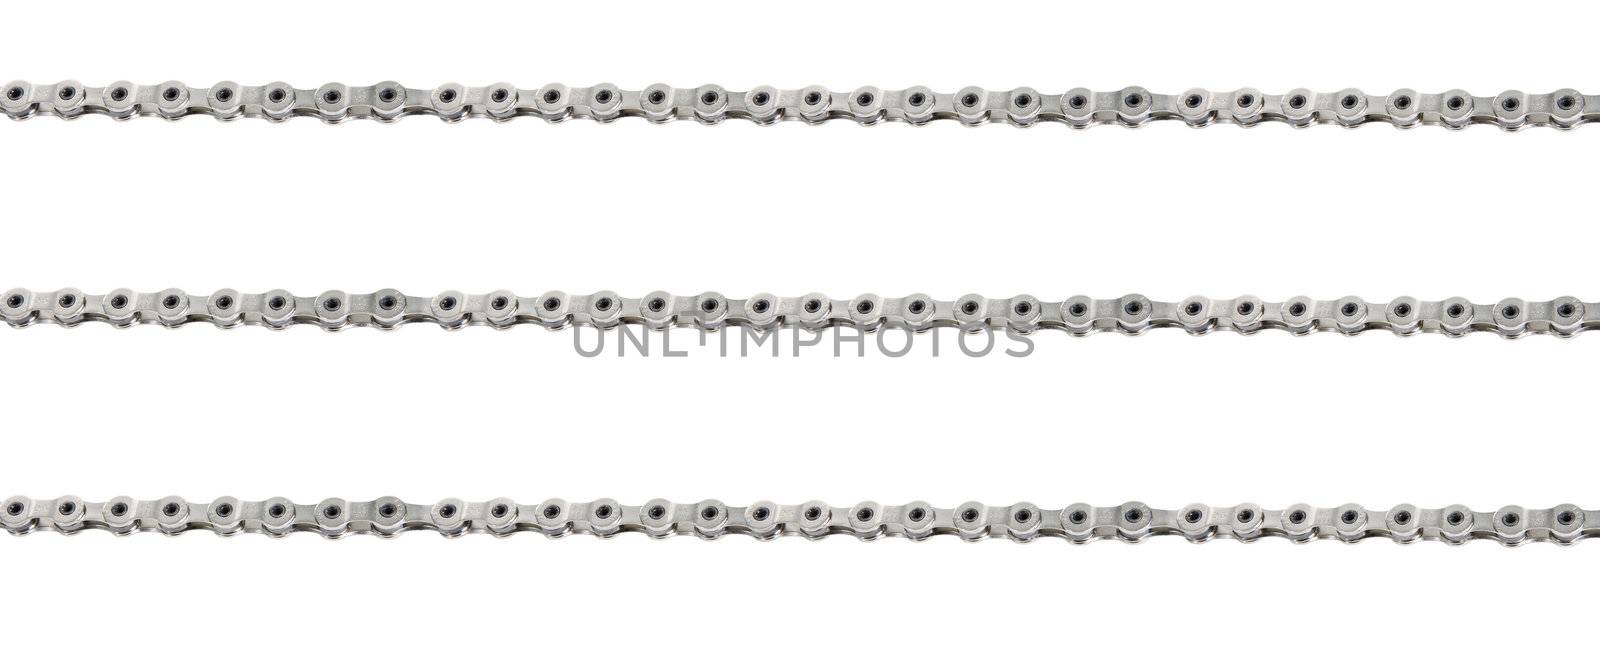 bicycle chains on white background by ozaiachin